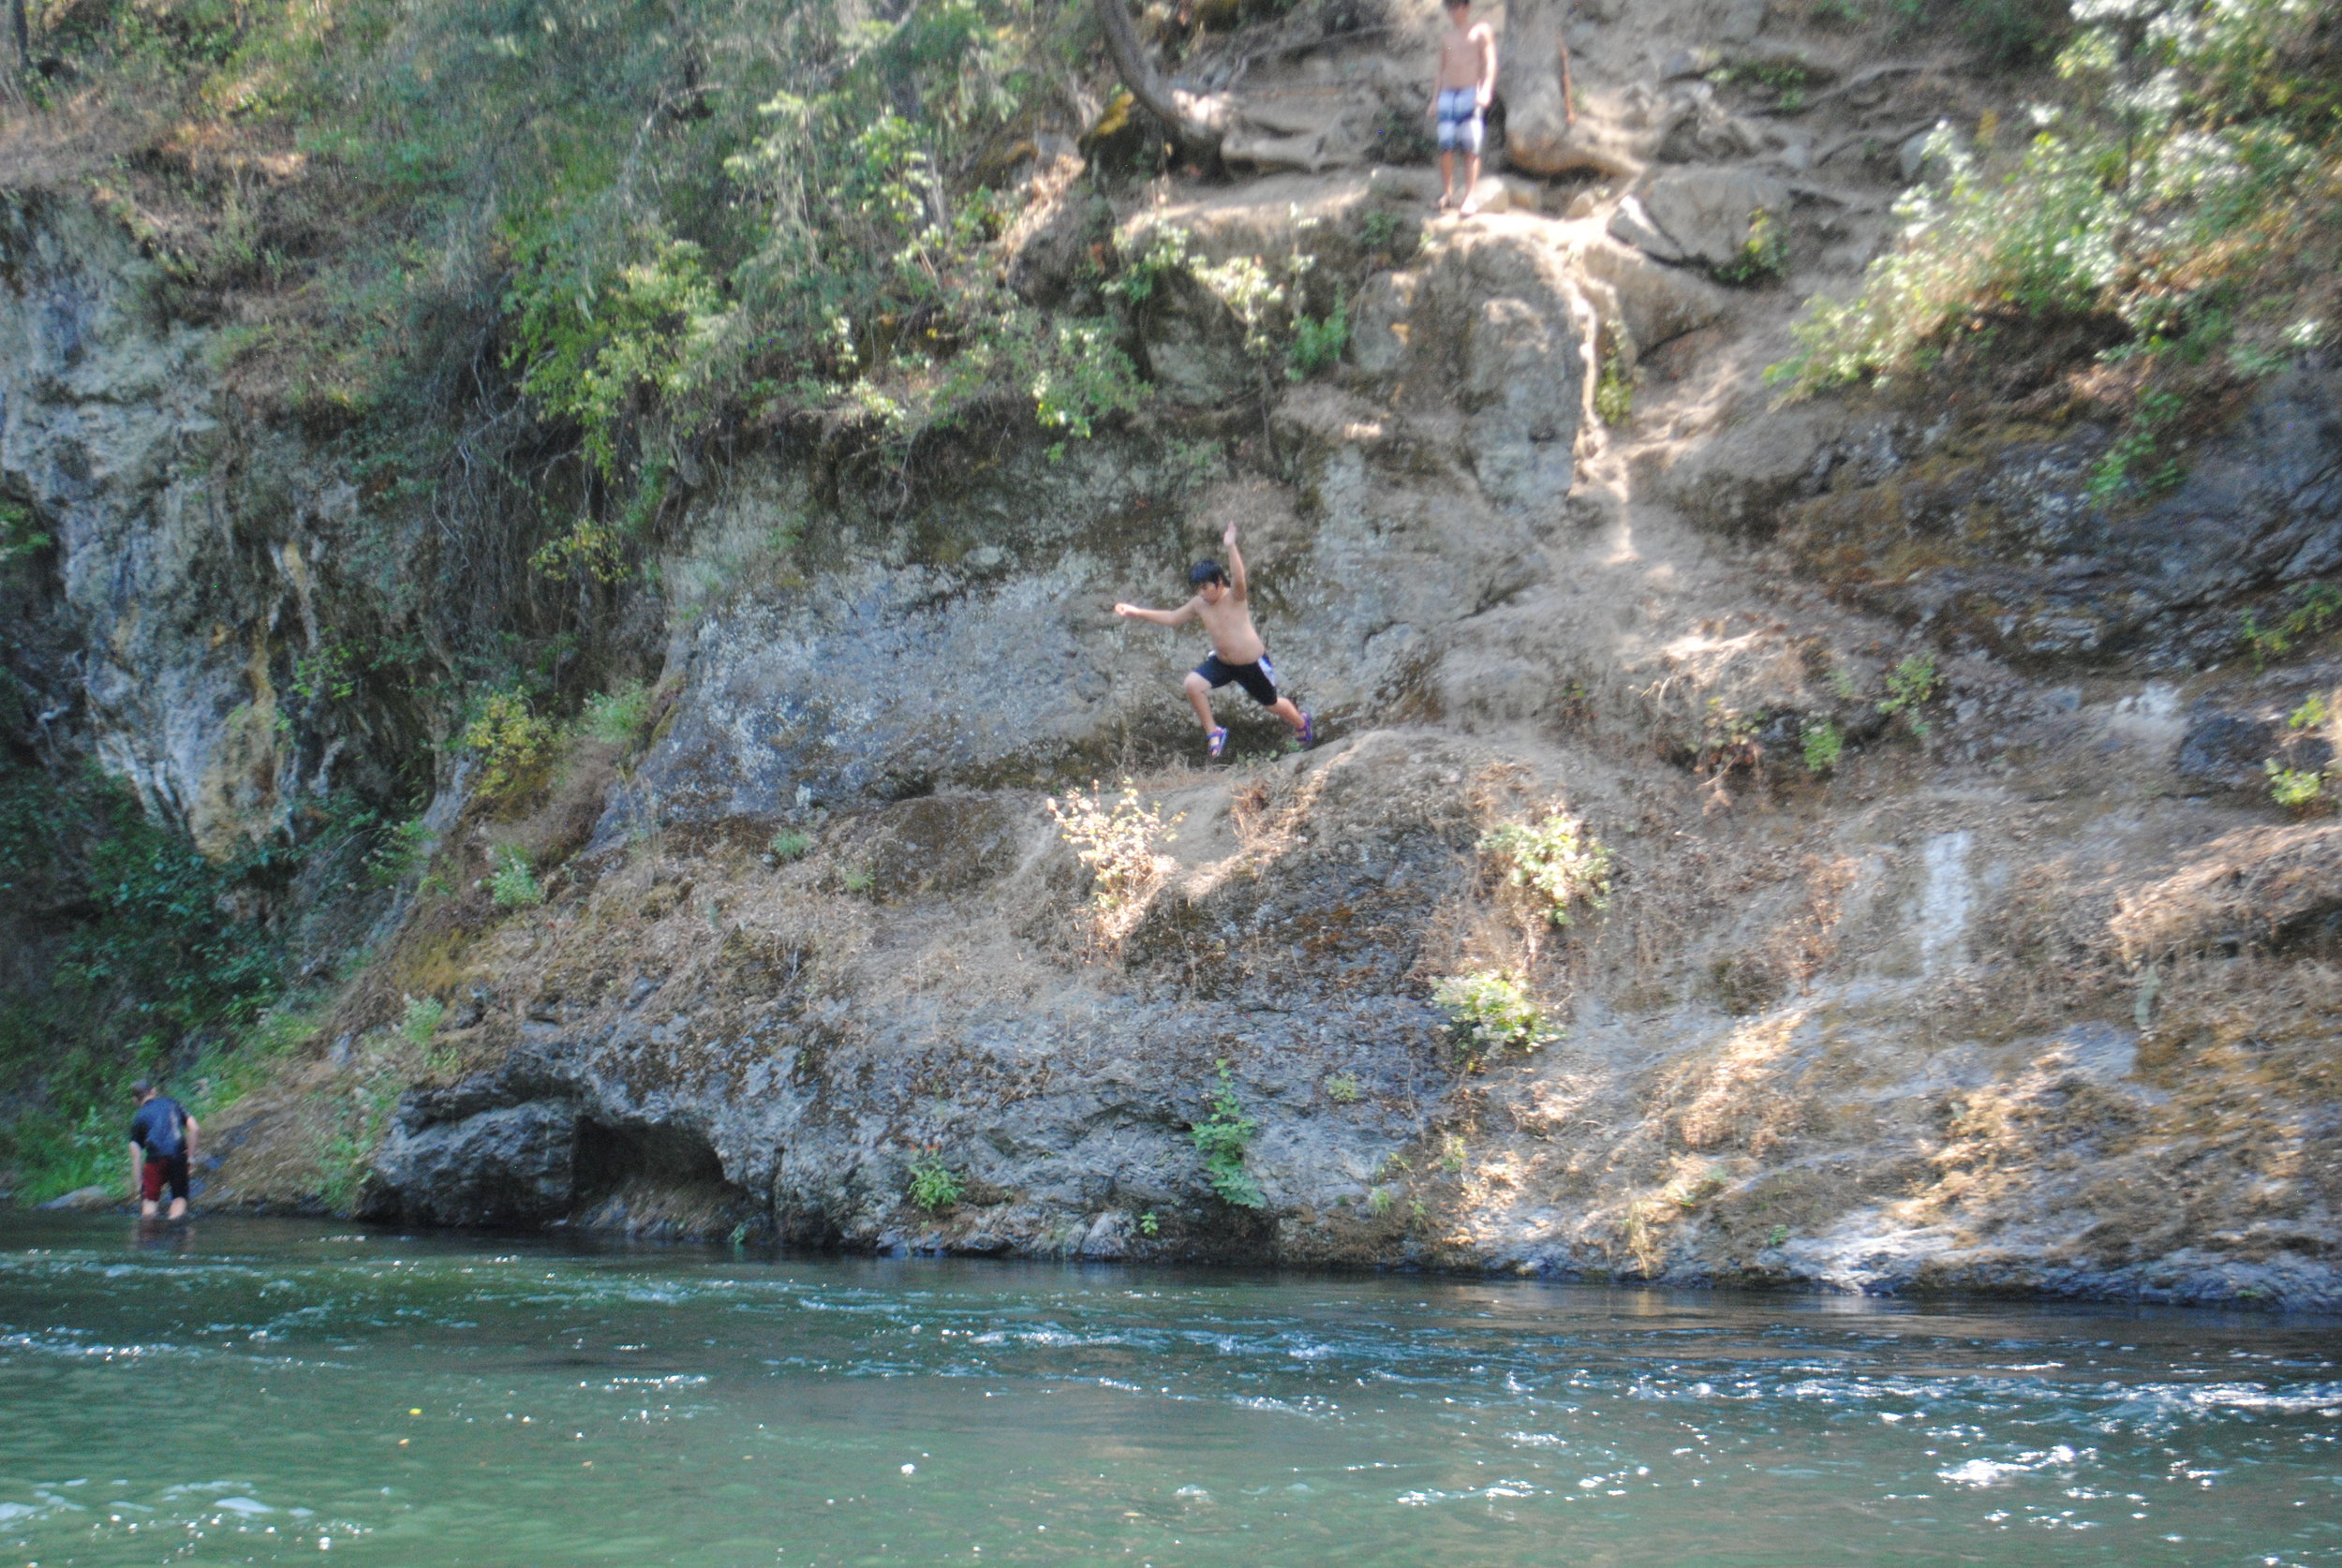 MCKEE BRIDGE - Swimming Hole - What to do in Southern Oregon - Outdoor Adventures - Fun with Kids - Applegate River